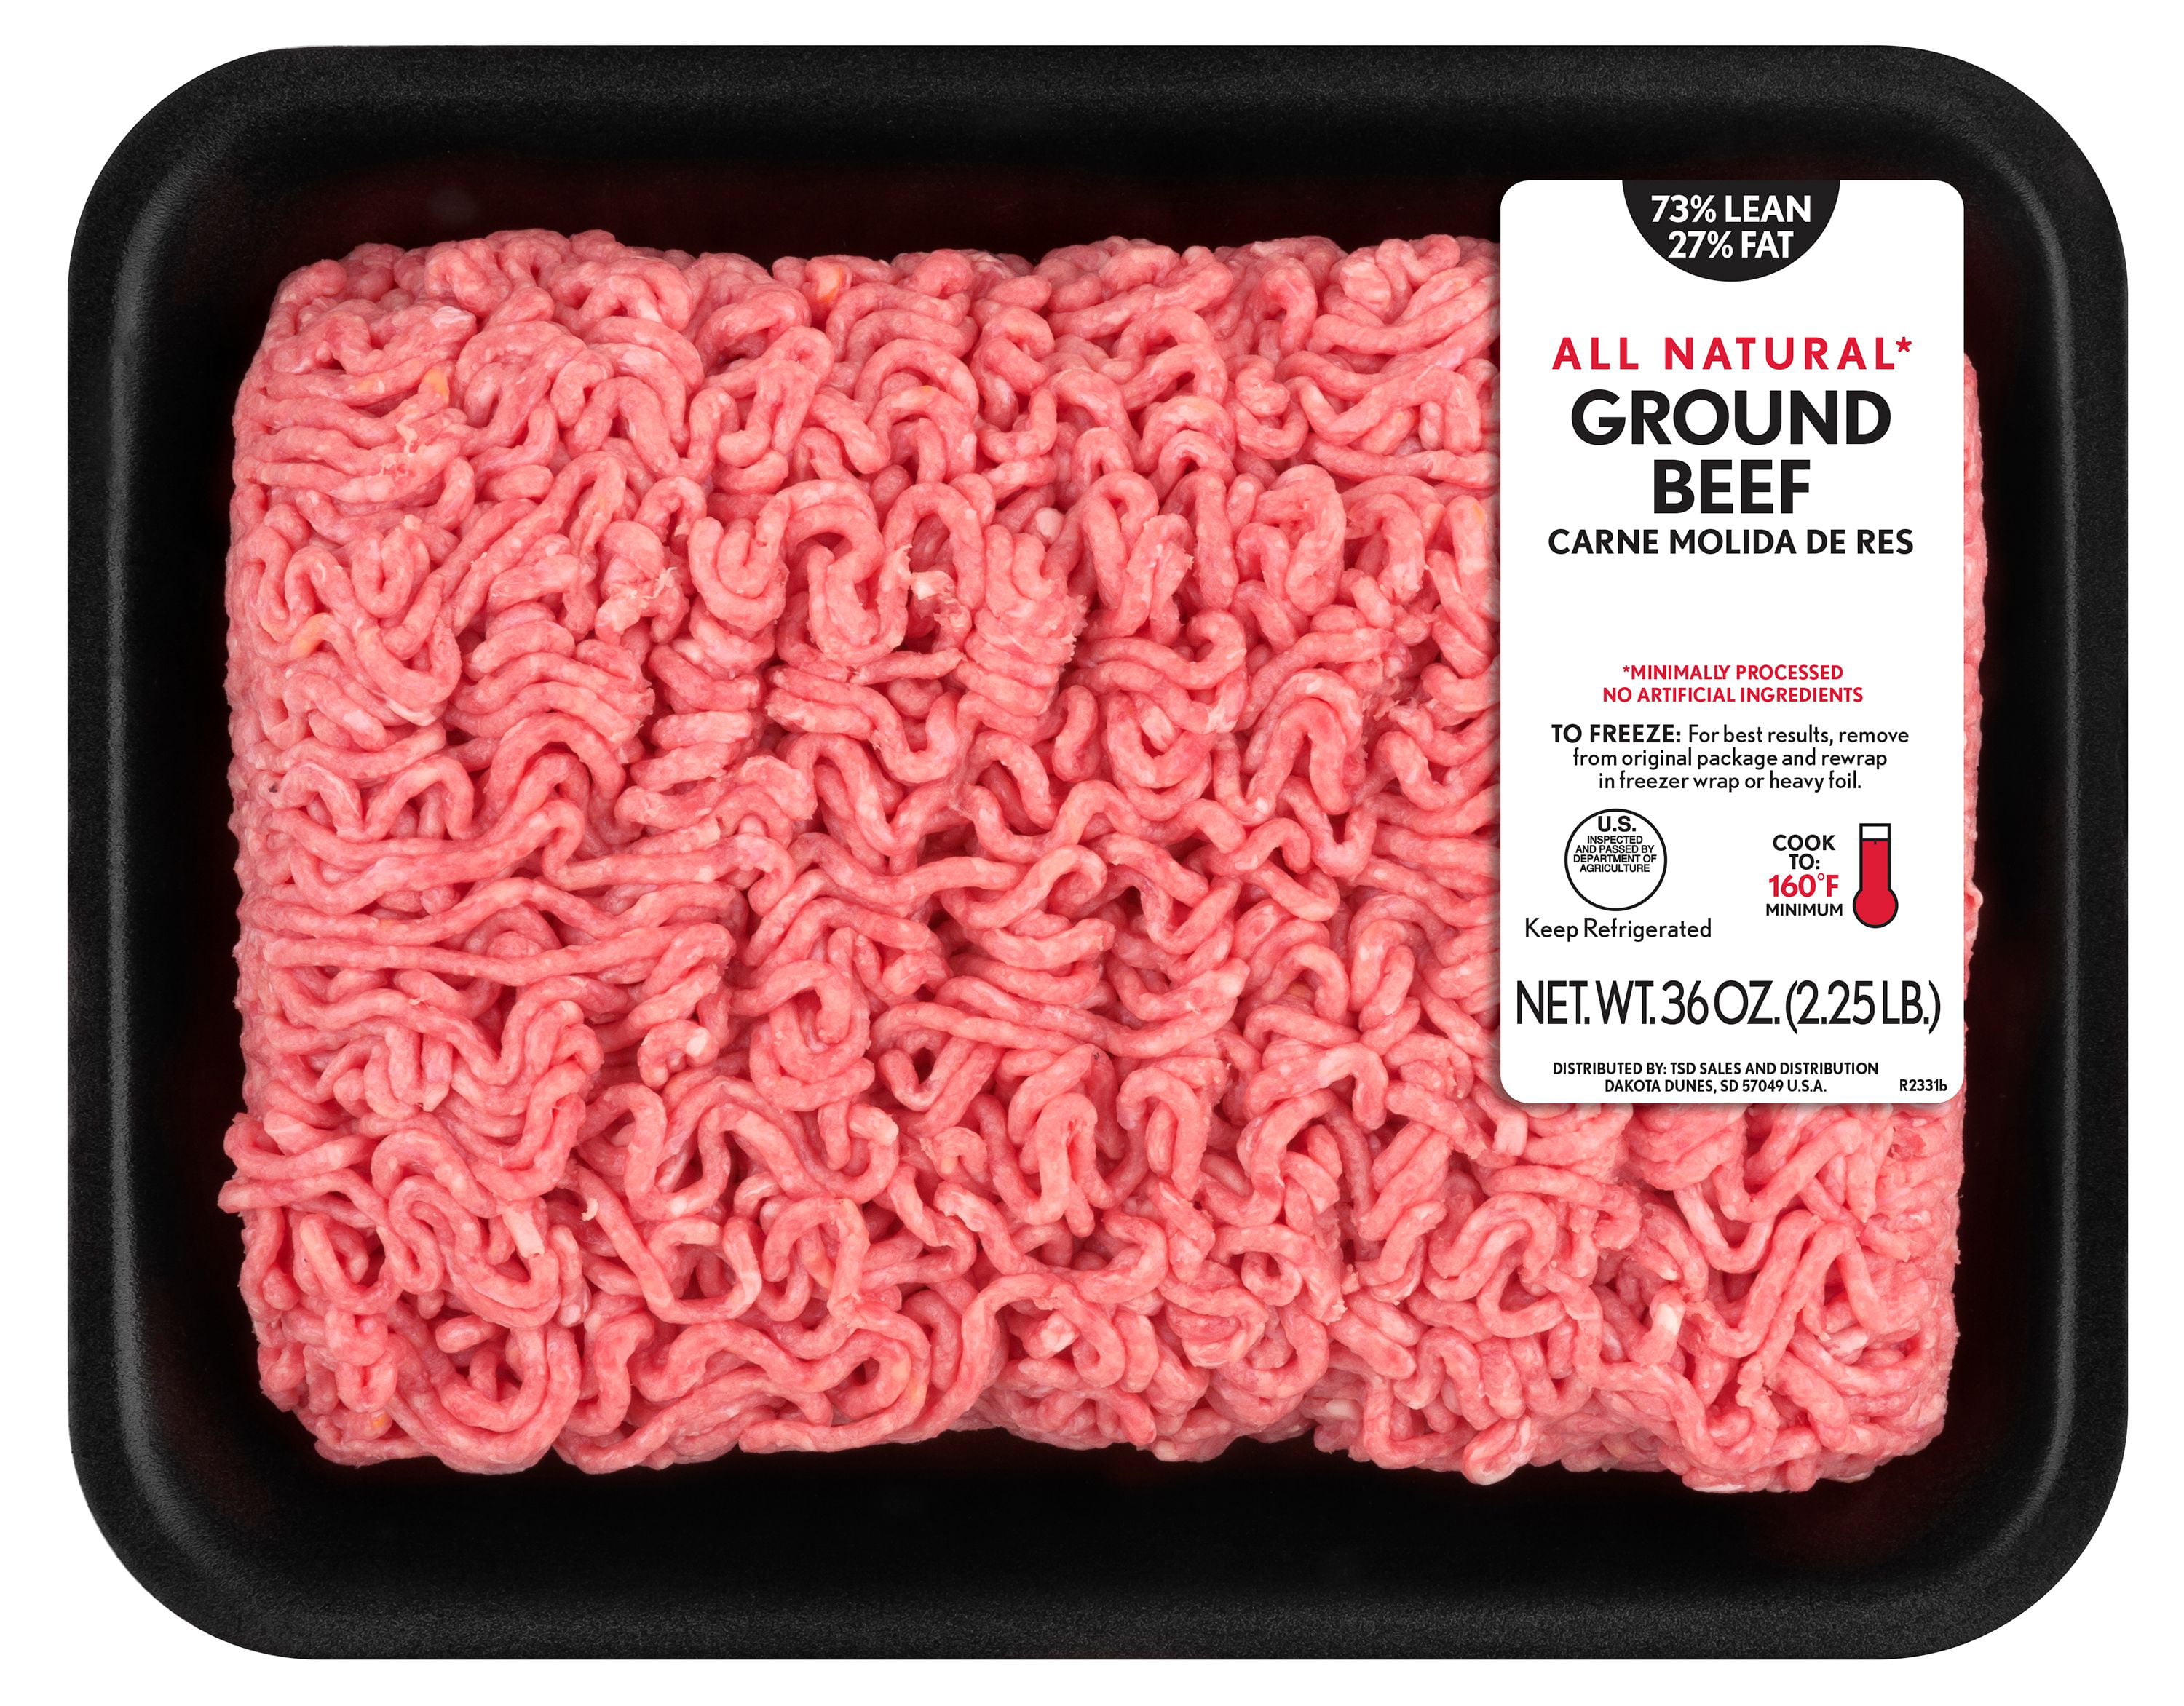 Walmart Ground Beef Price How do you Price a Switches?